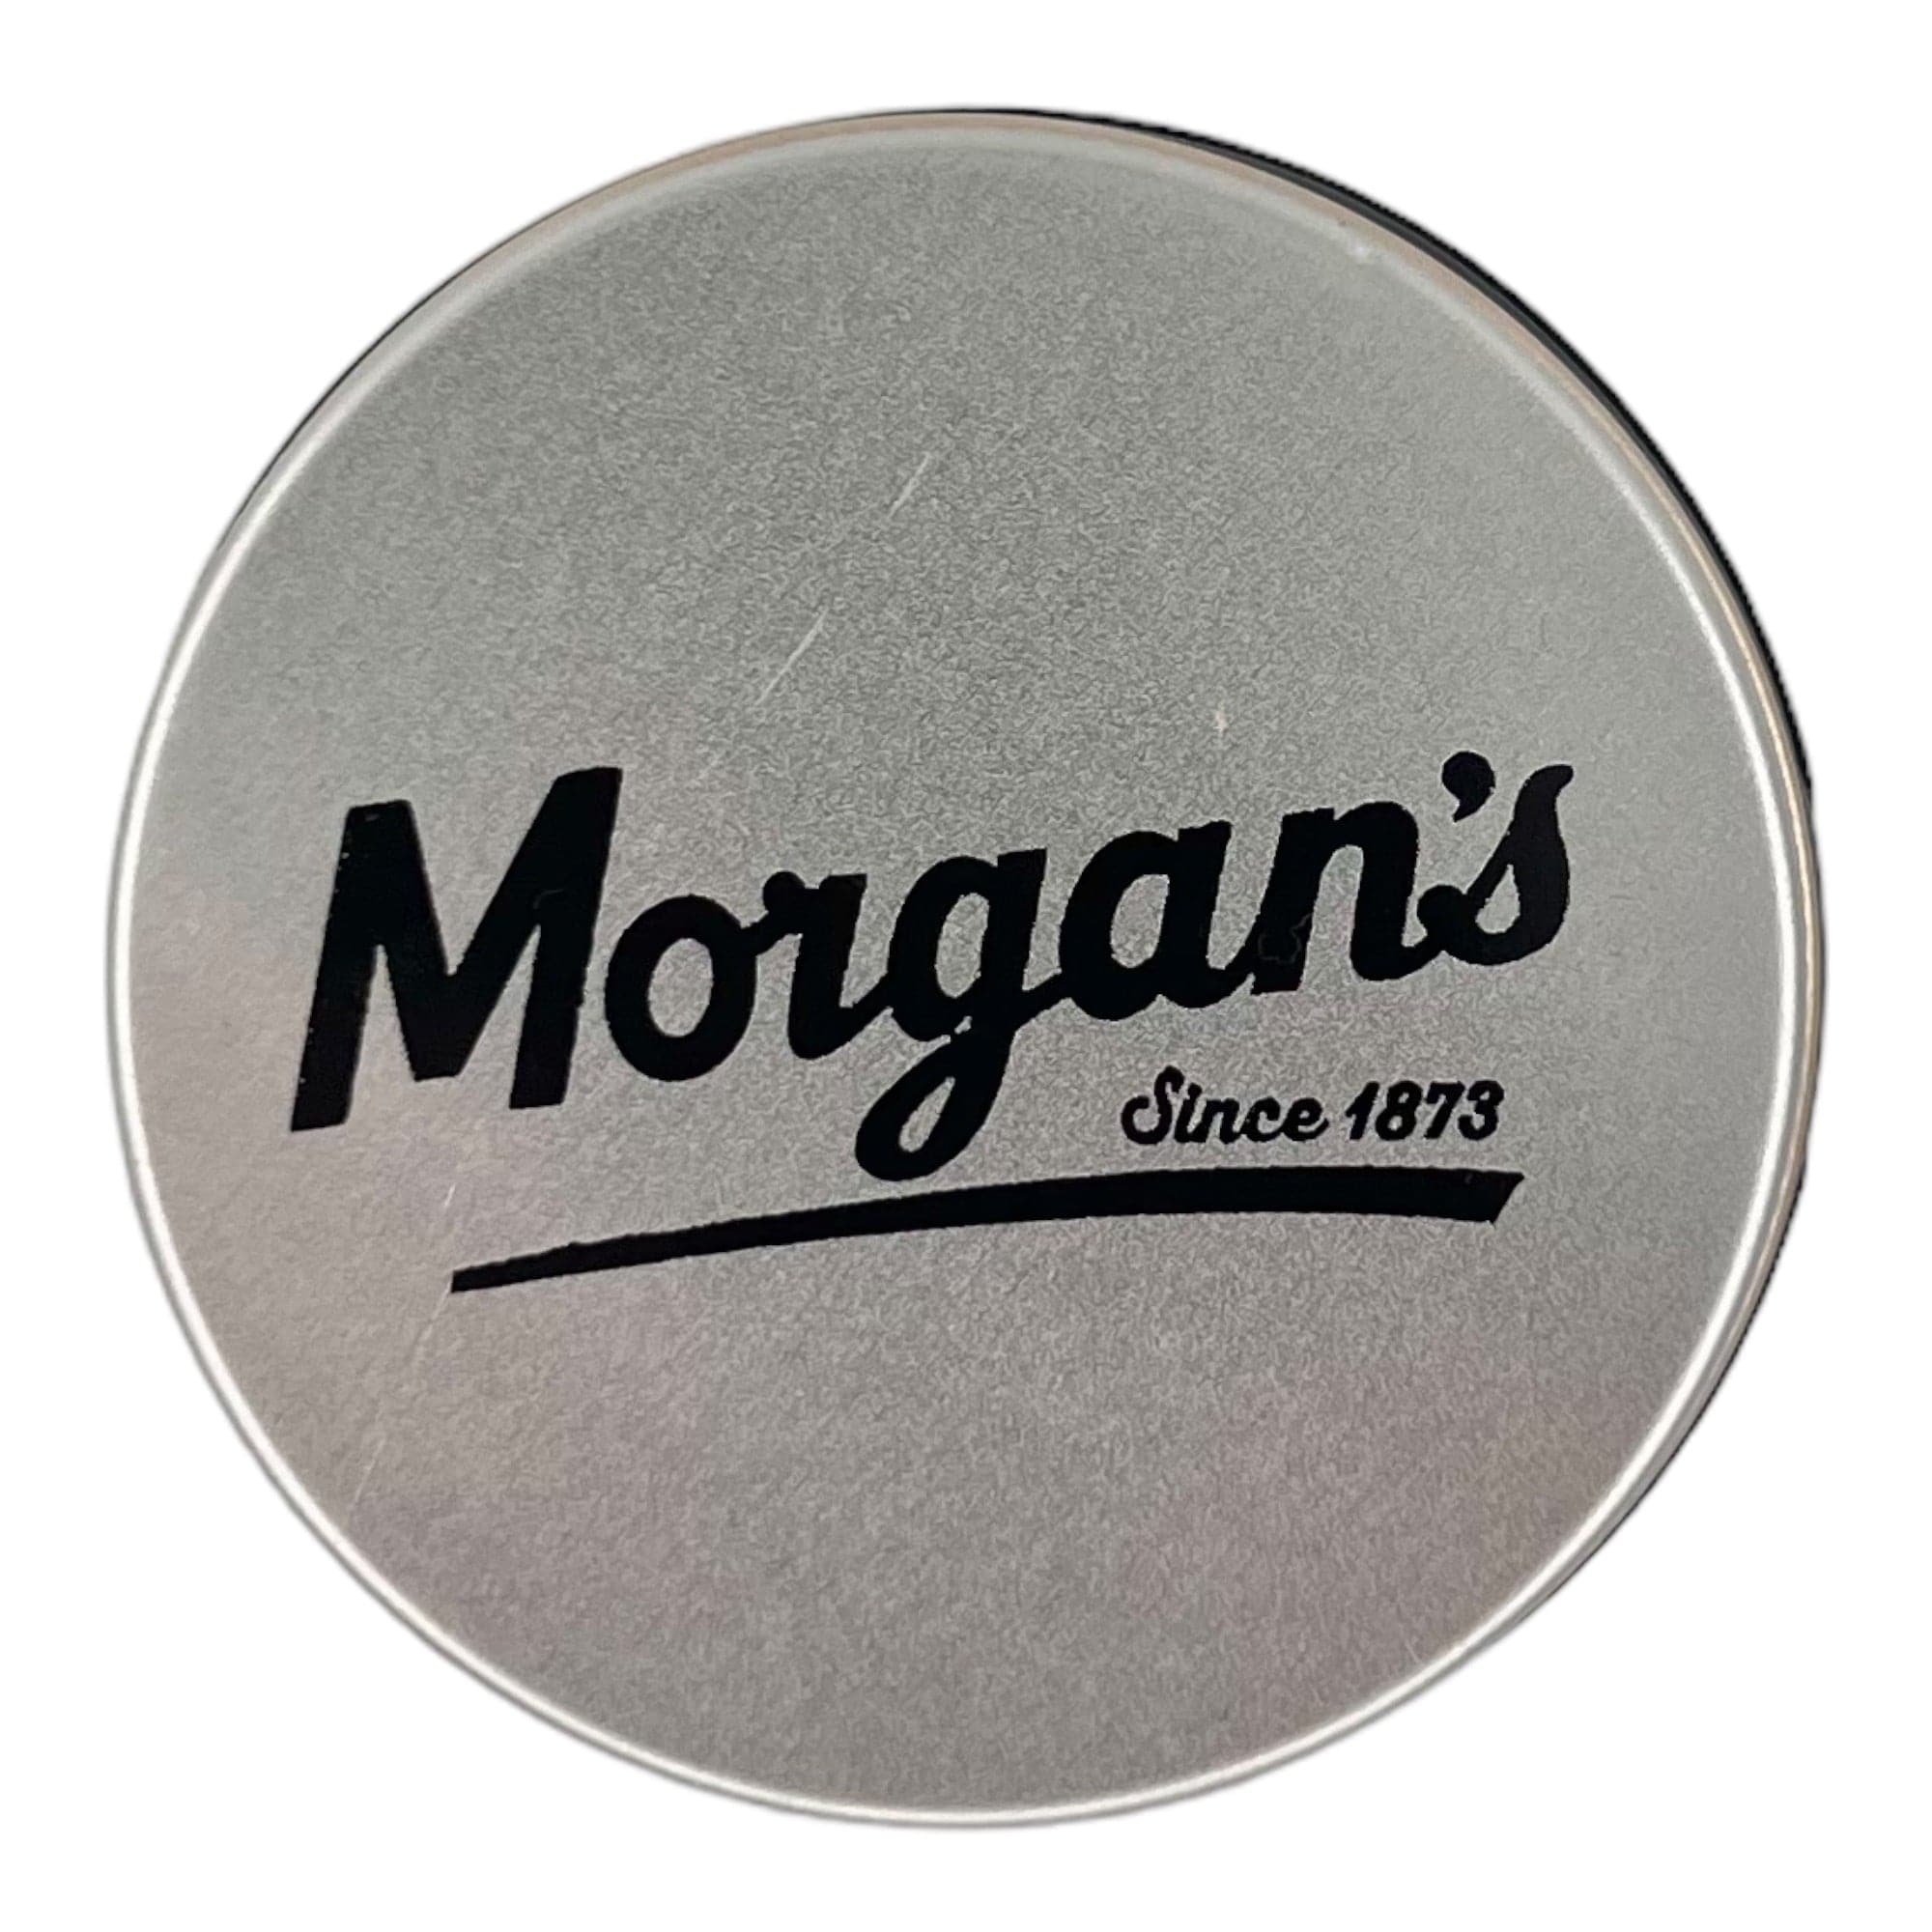 Morgan's - Styling Fibre Forming and Defining Cream 120ml